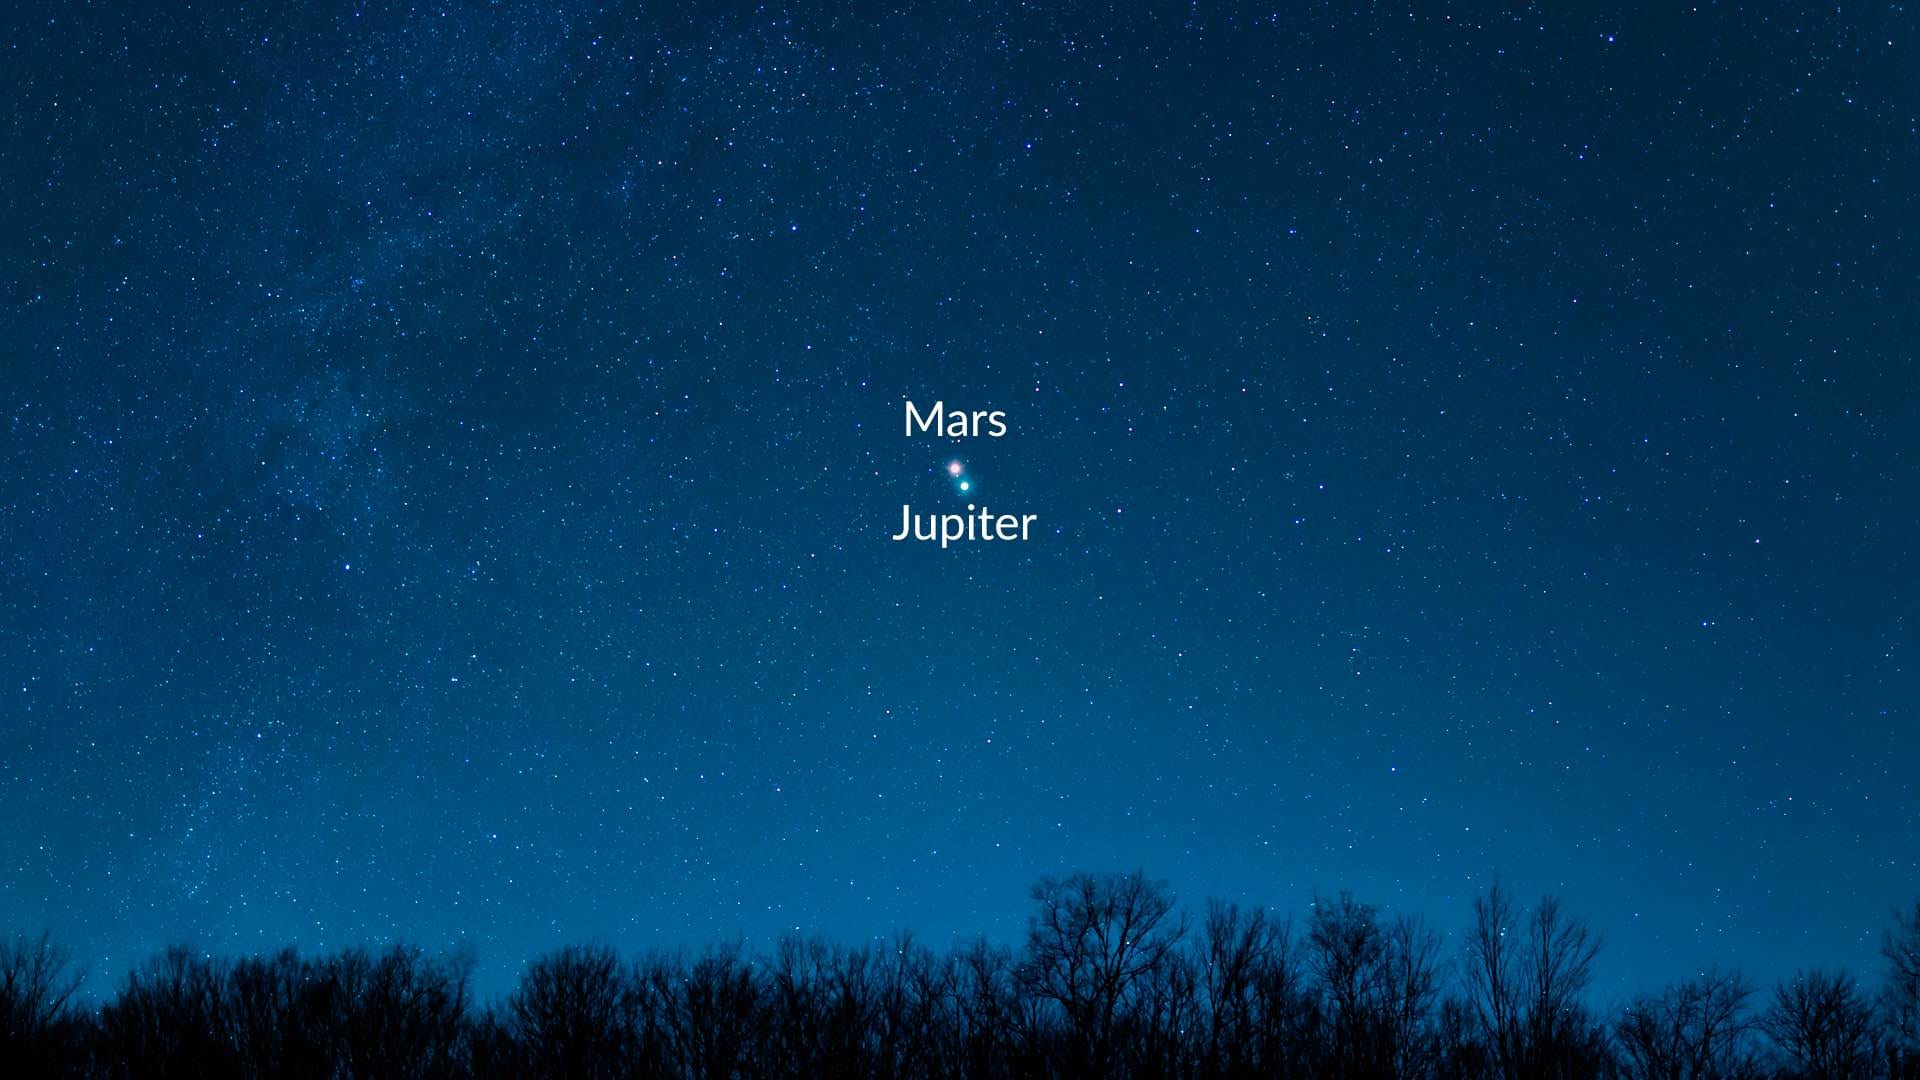 Very close approach to Mars and Jupiter